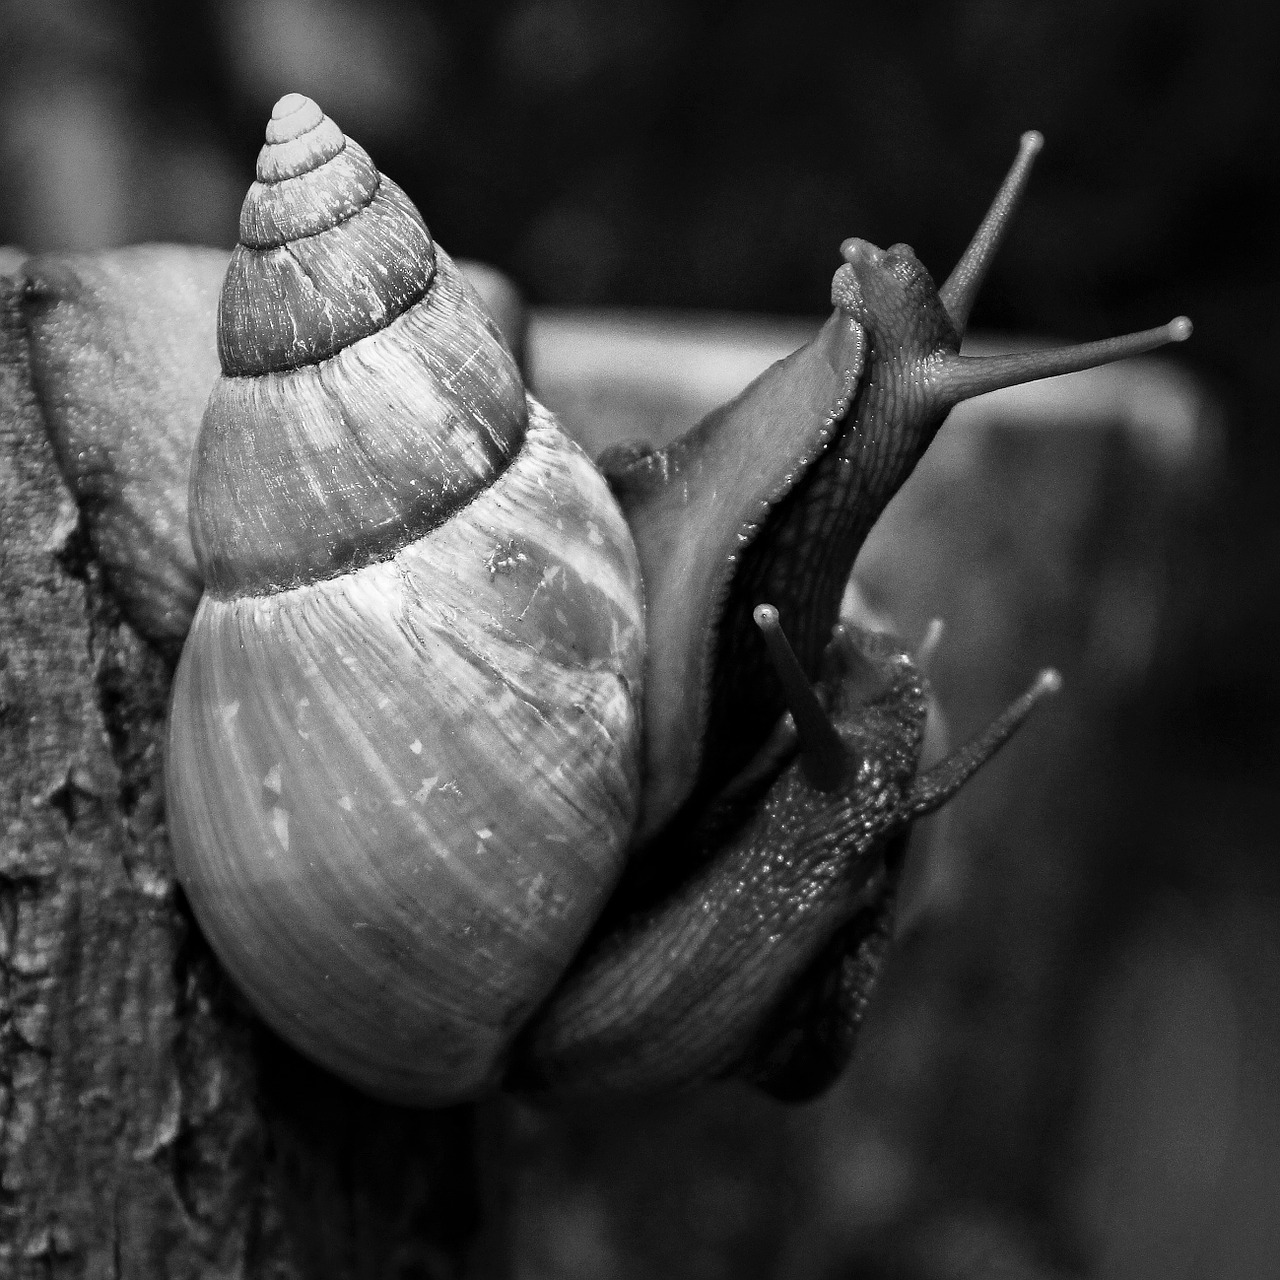 snails achatina african free photo